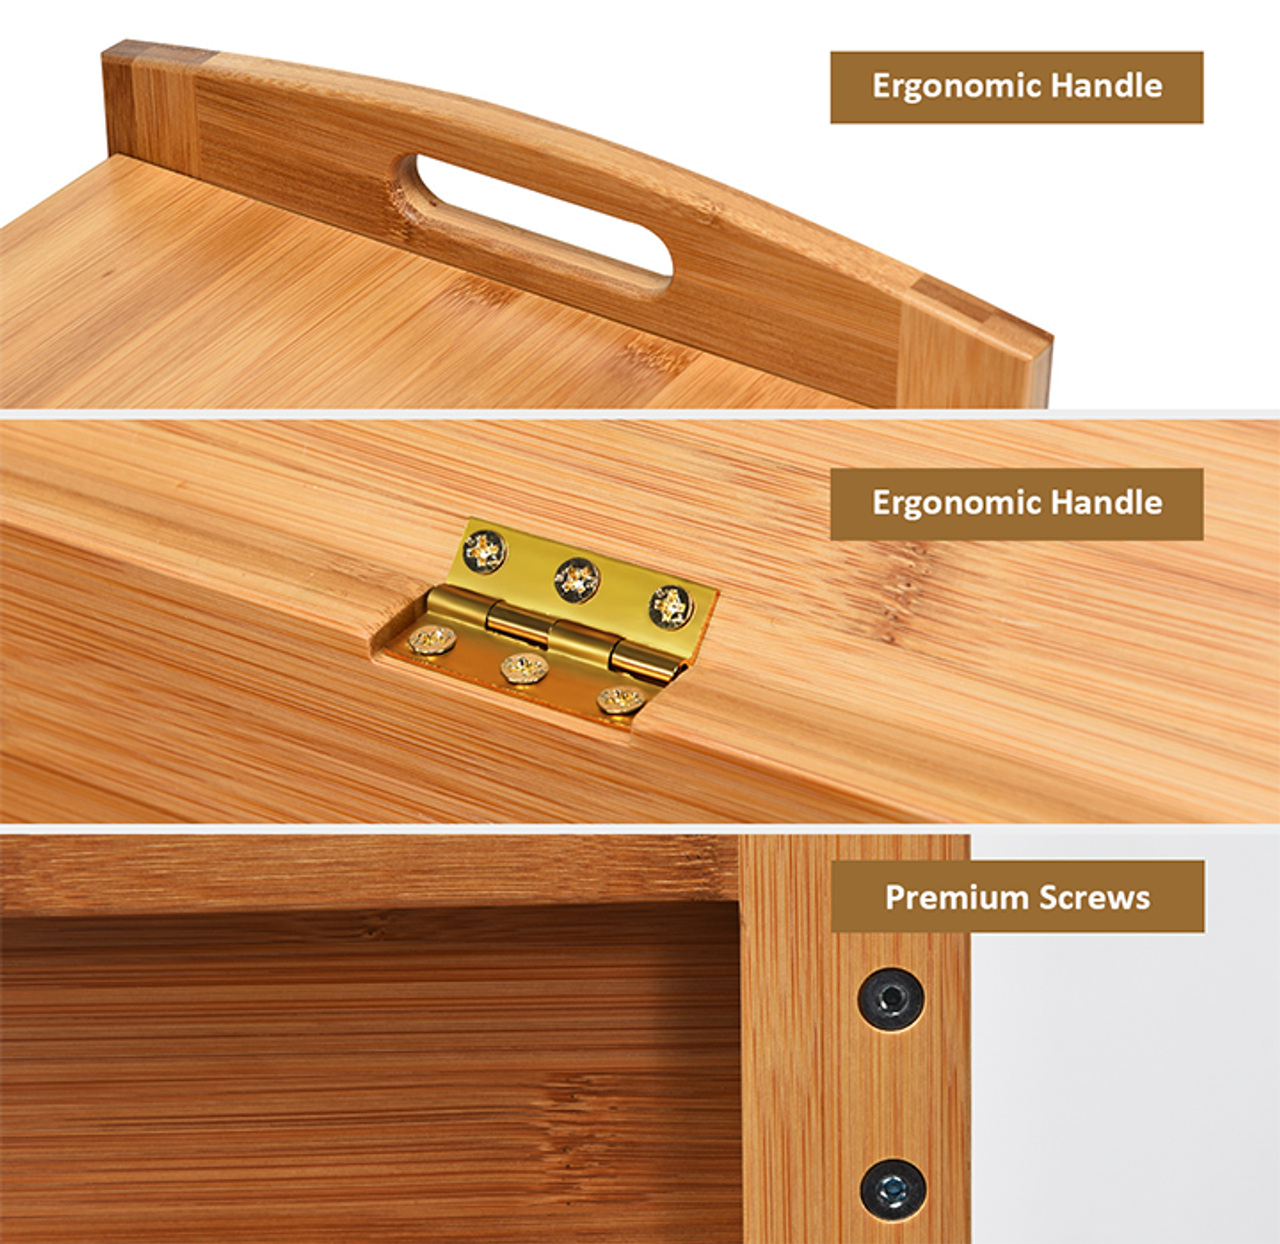 Bamboo 3-Tier Entryway Storage Bench product image